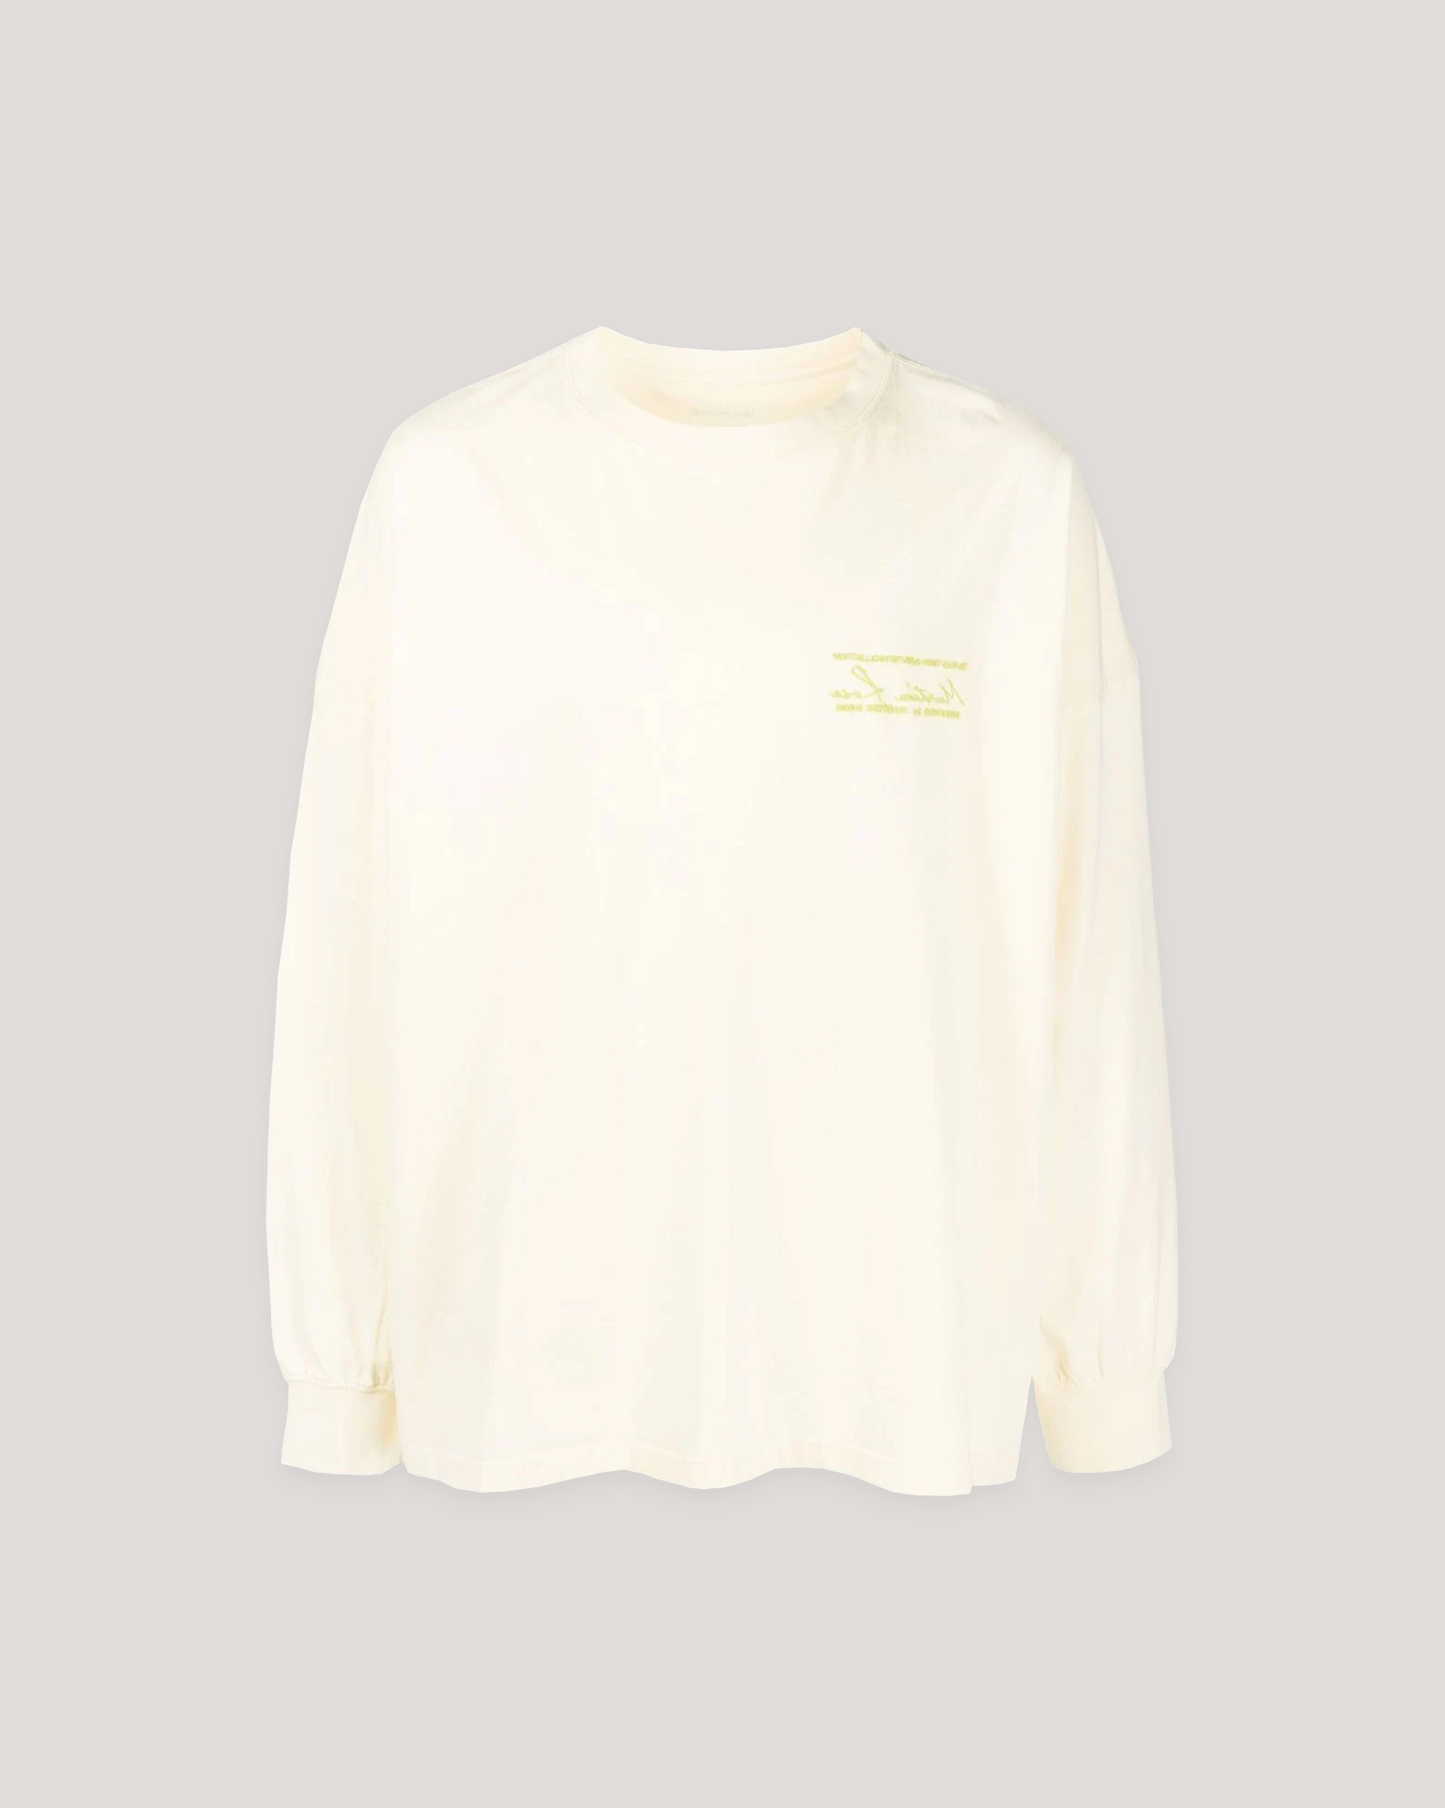 MARTINE ROSE EMBROIDERED LOGO LONG SLEEVE TEE